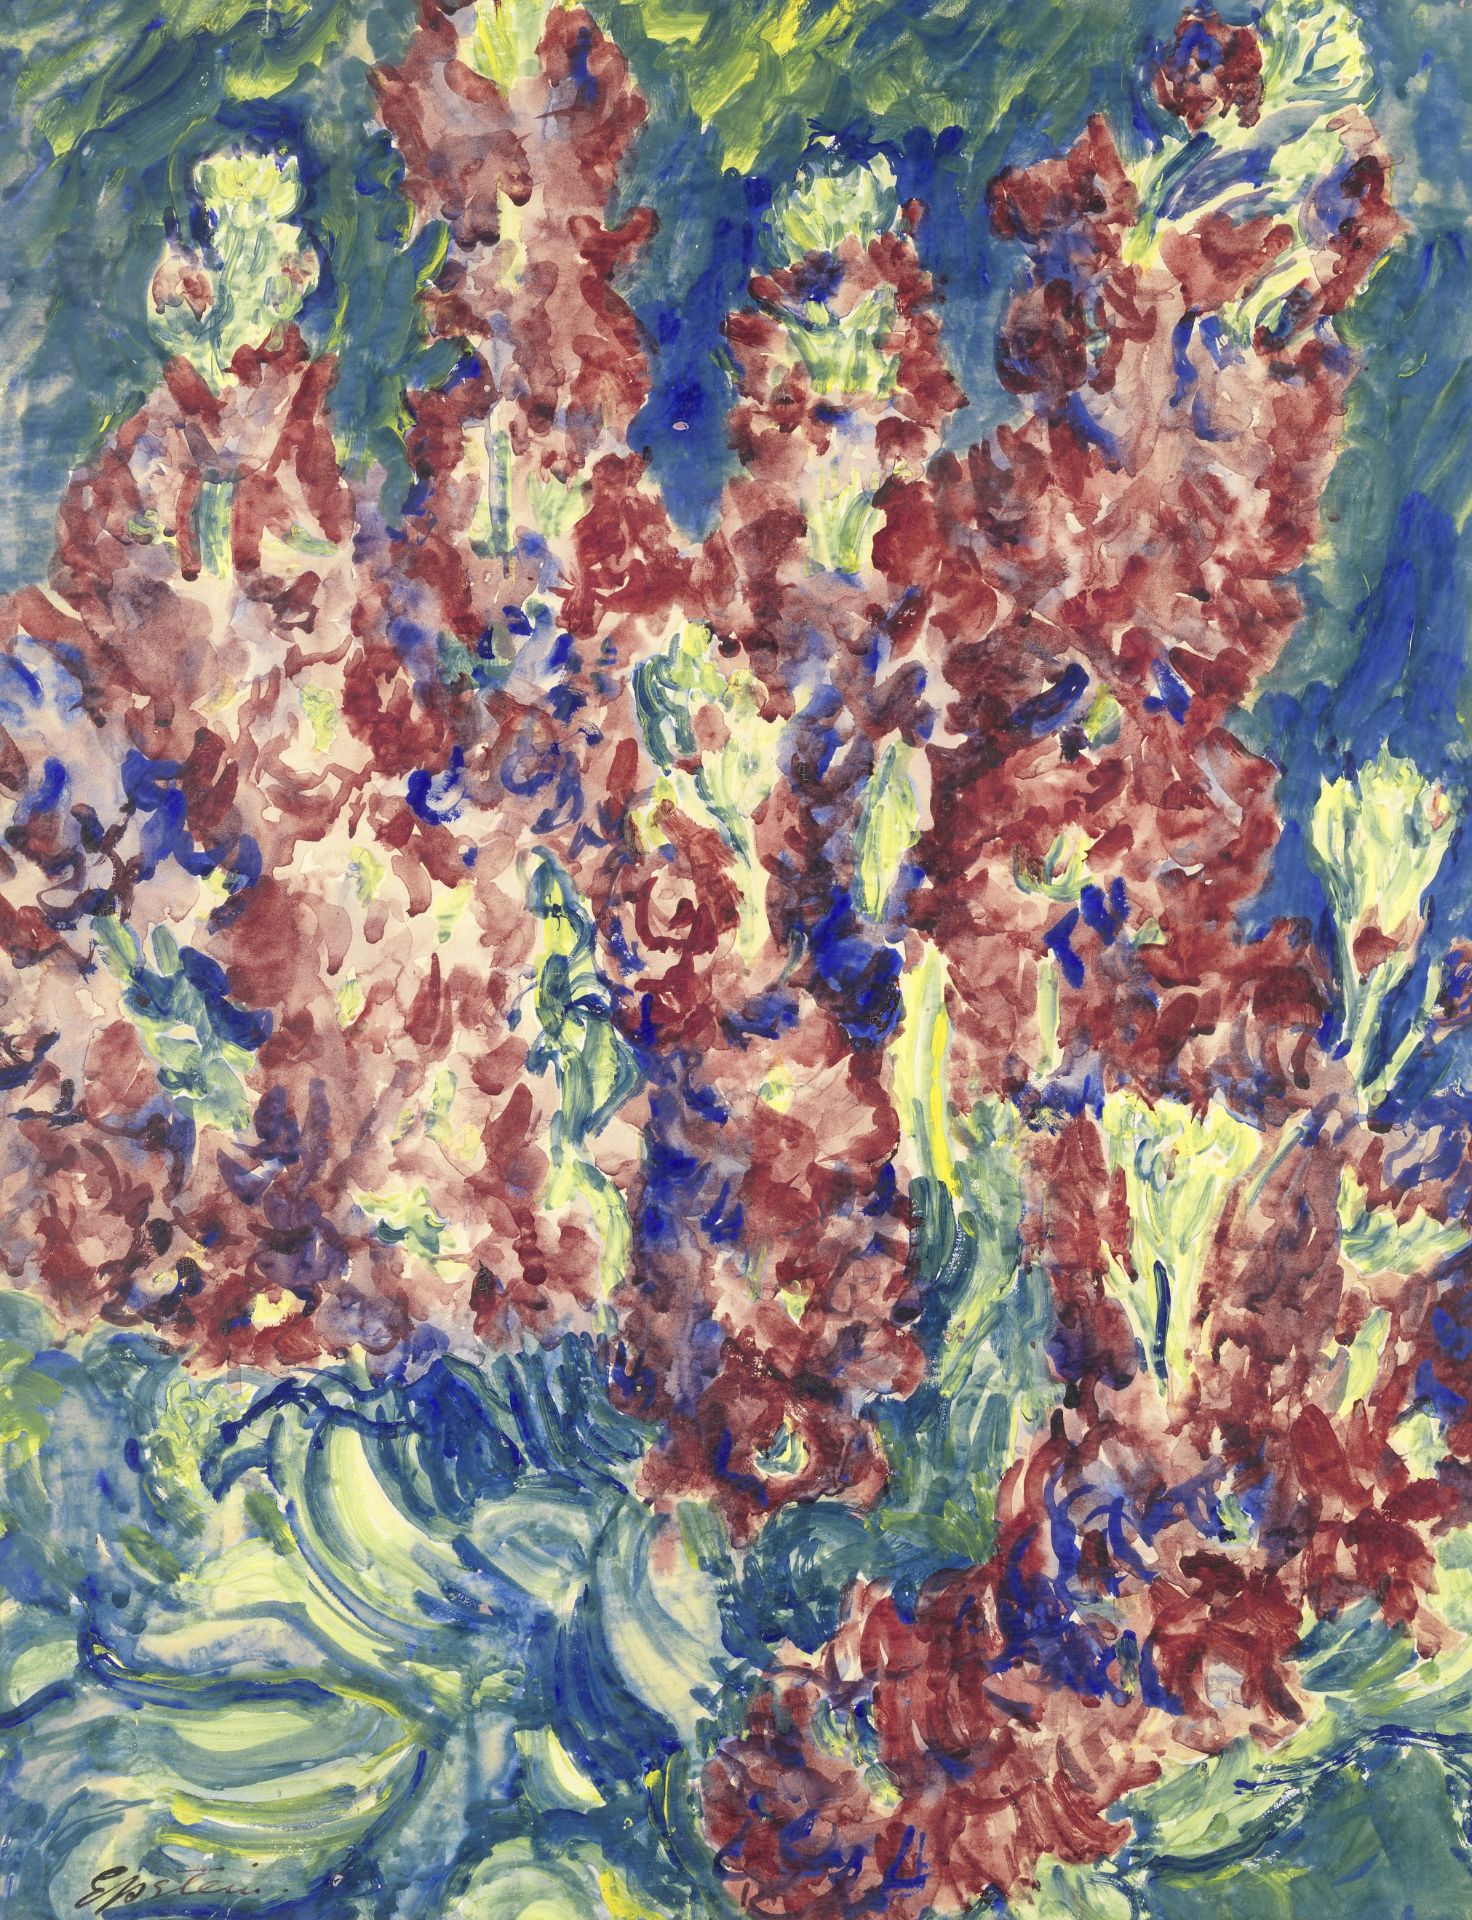 Sir Jacob Epstein (British, 1880-1959) Stock Flowers (Painted in 1936)